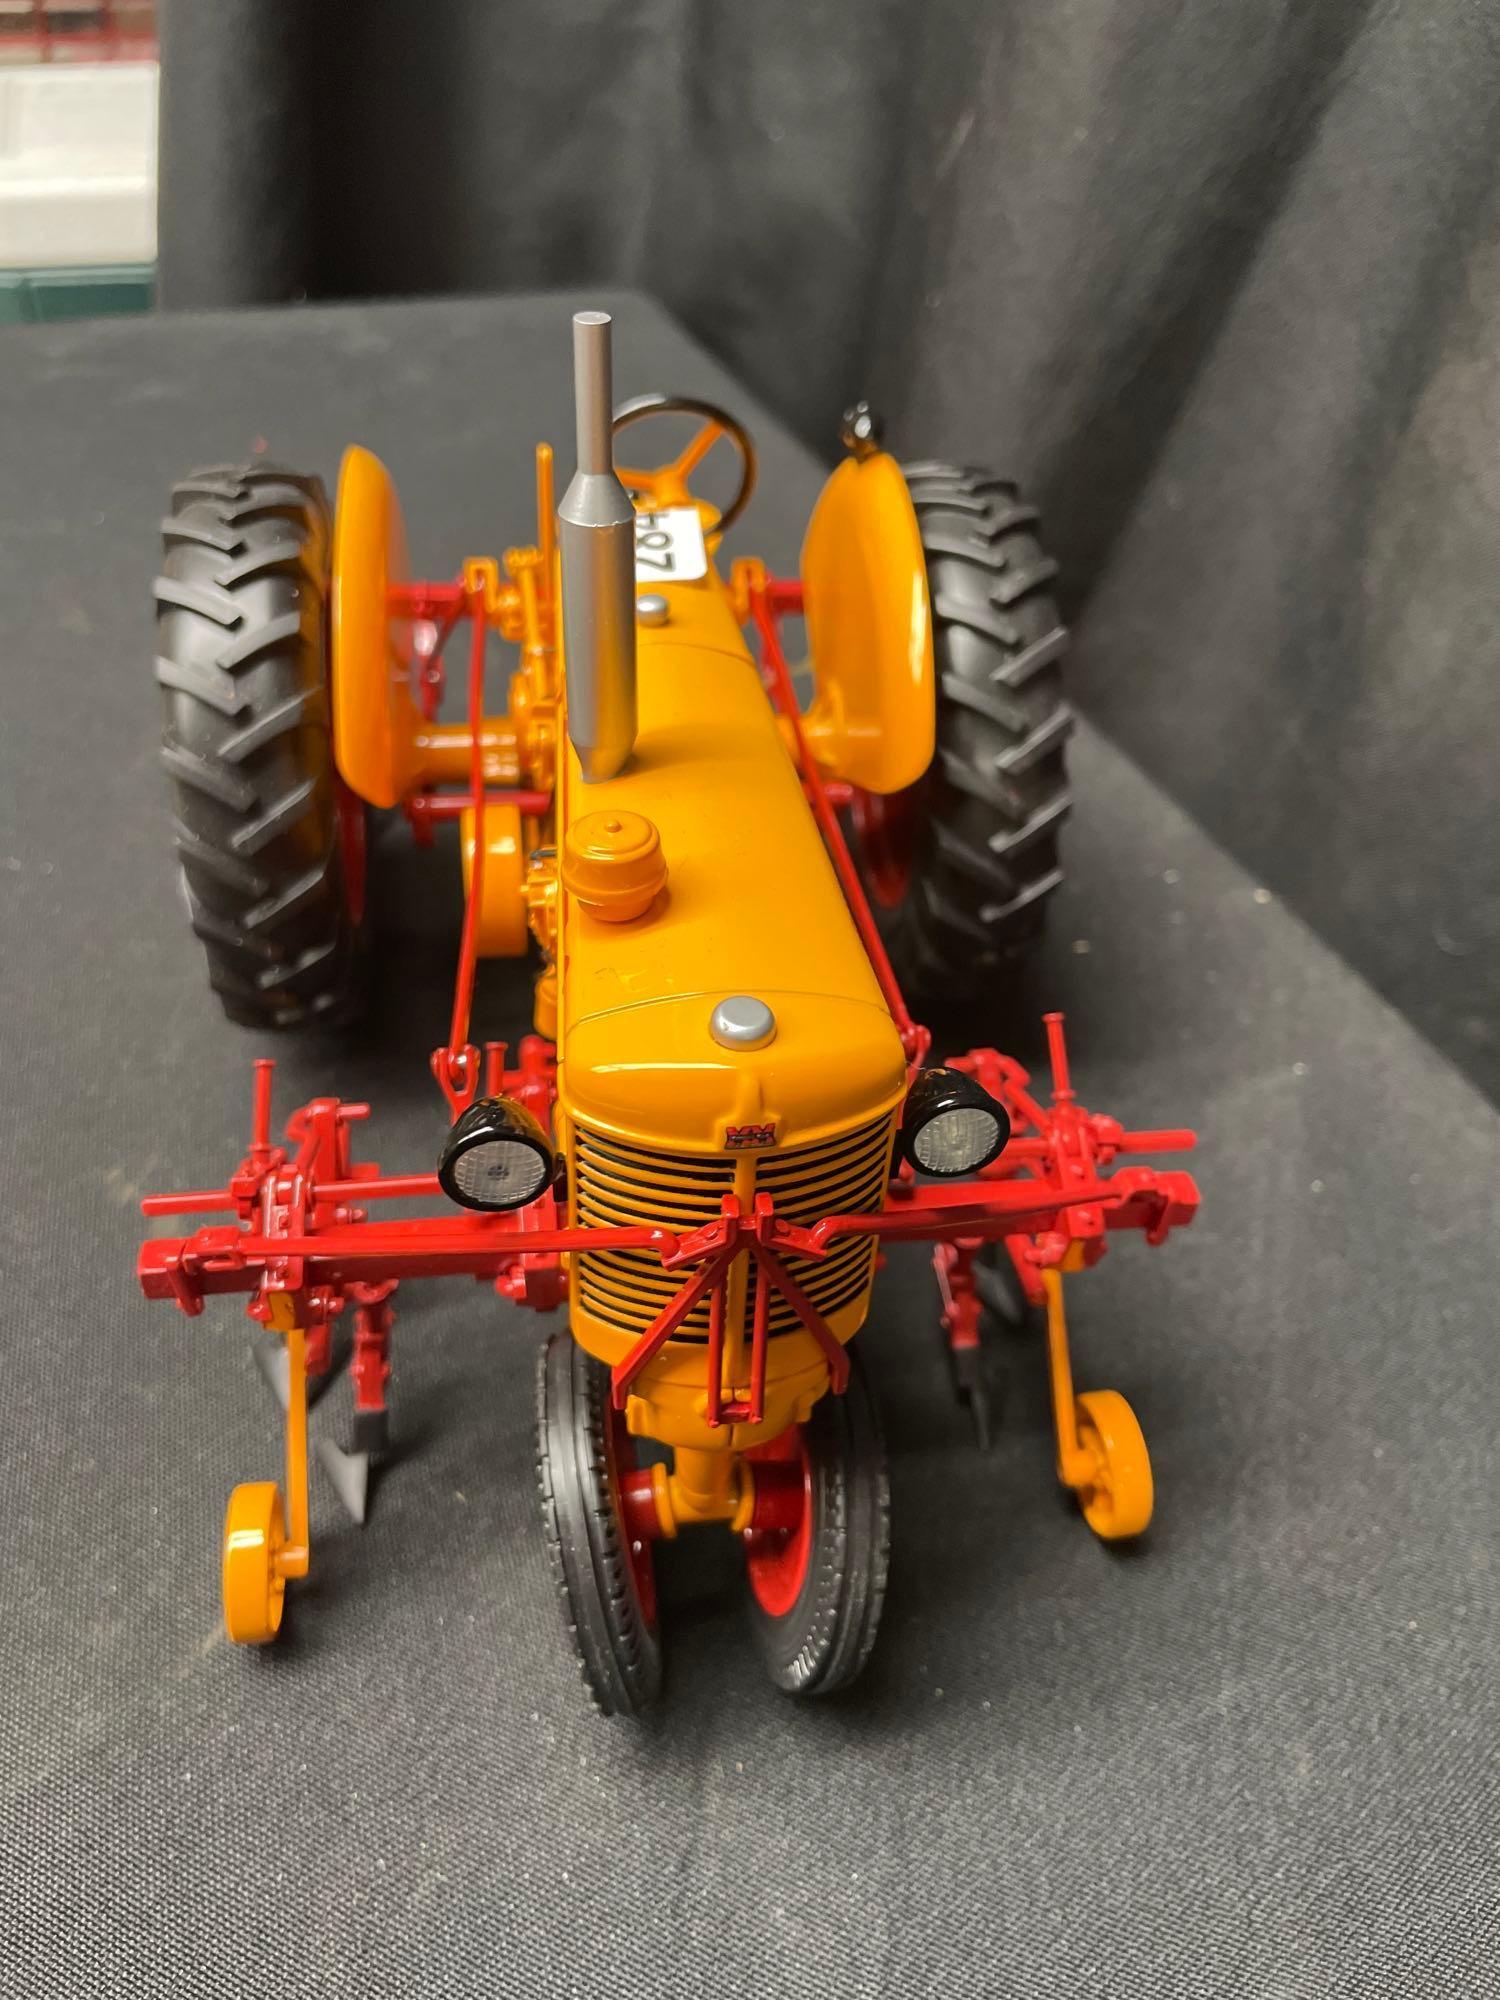 1/16th Scale 2010 Summer Farm Toy Show Minneapolis Moline Tractor w/front mount Cultivator